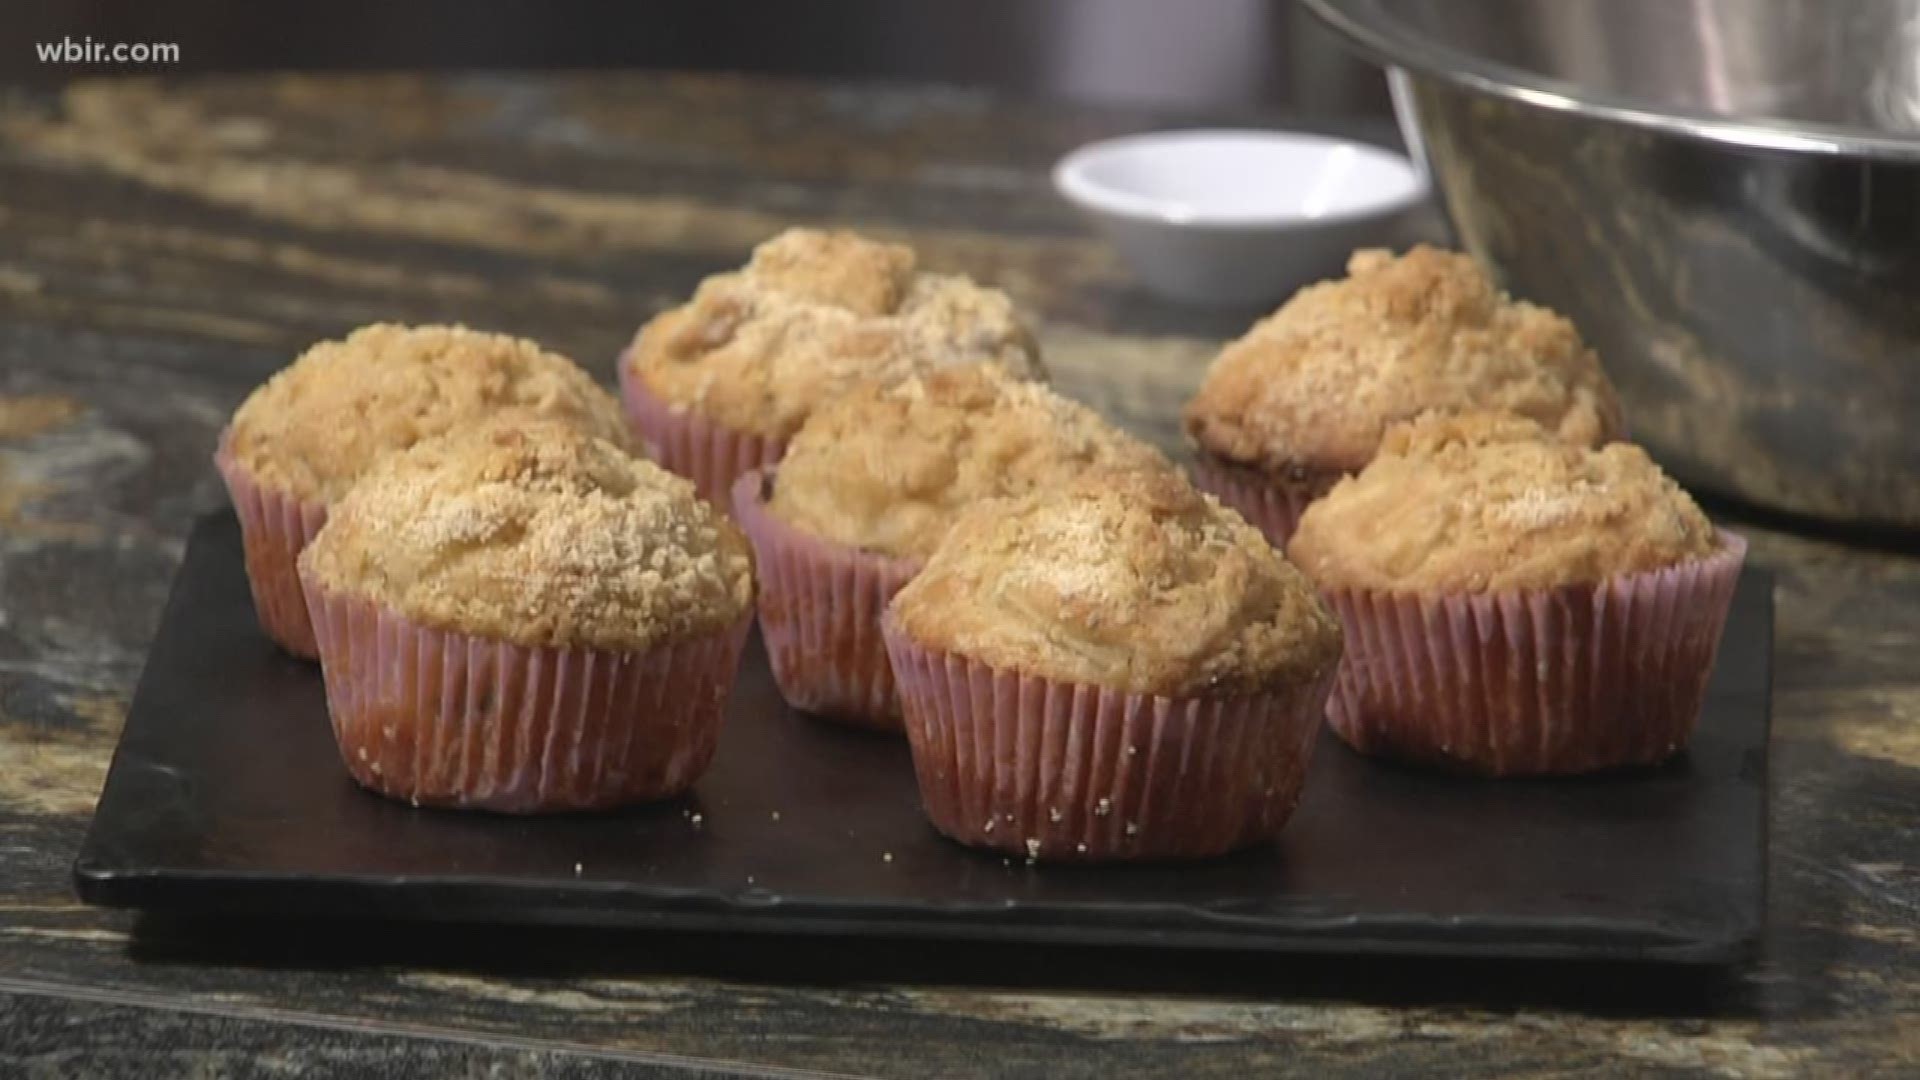 We're joined in the kitchen by Mahasti Vafaie from Tomato Head. She's showing us how to make apple honey muffins.